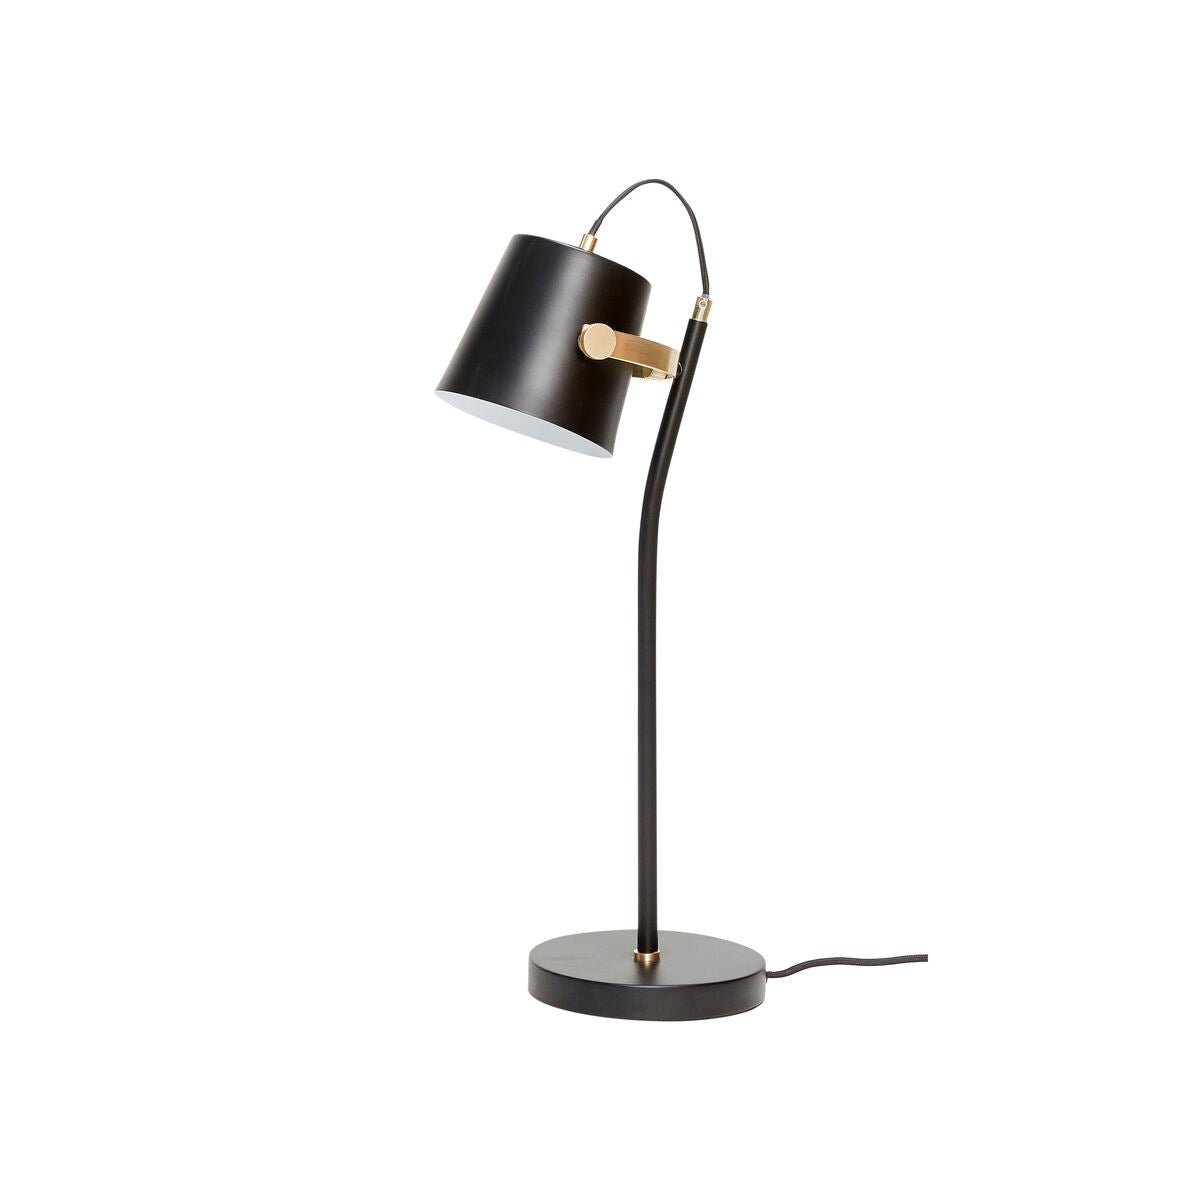 Architect - Table lamp Table lamp by Hübsch Interior